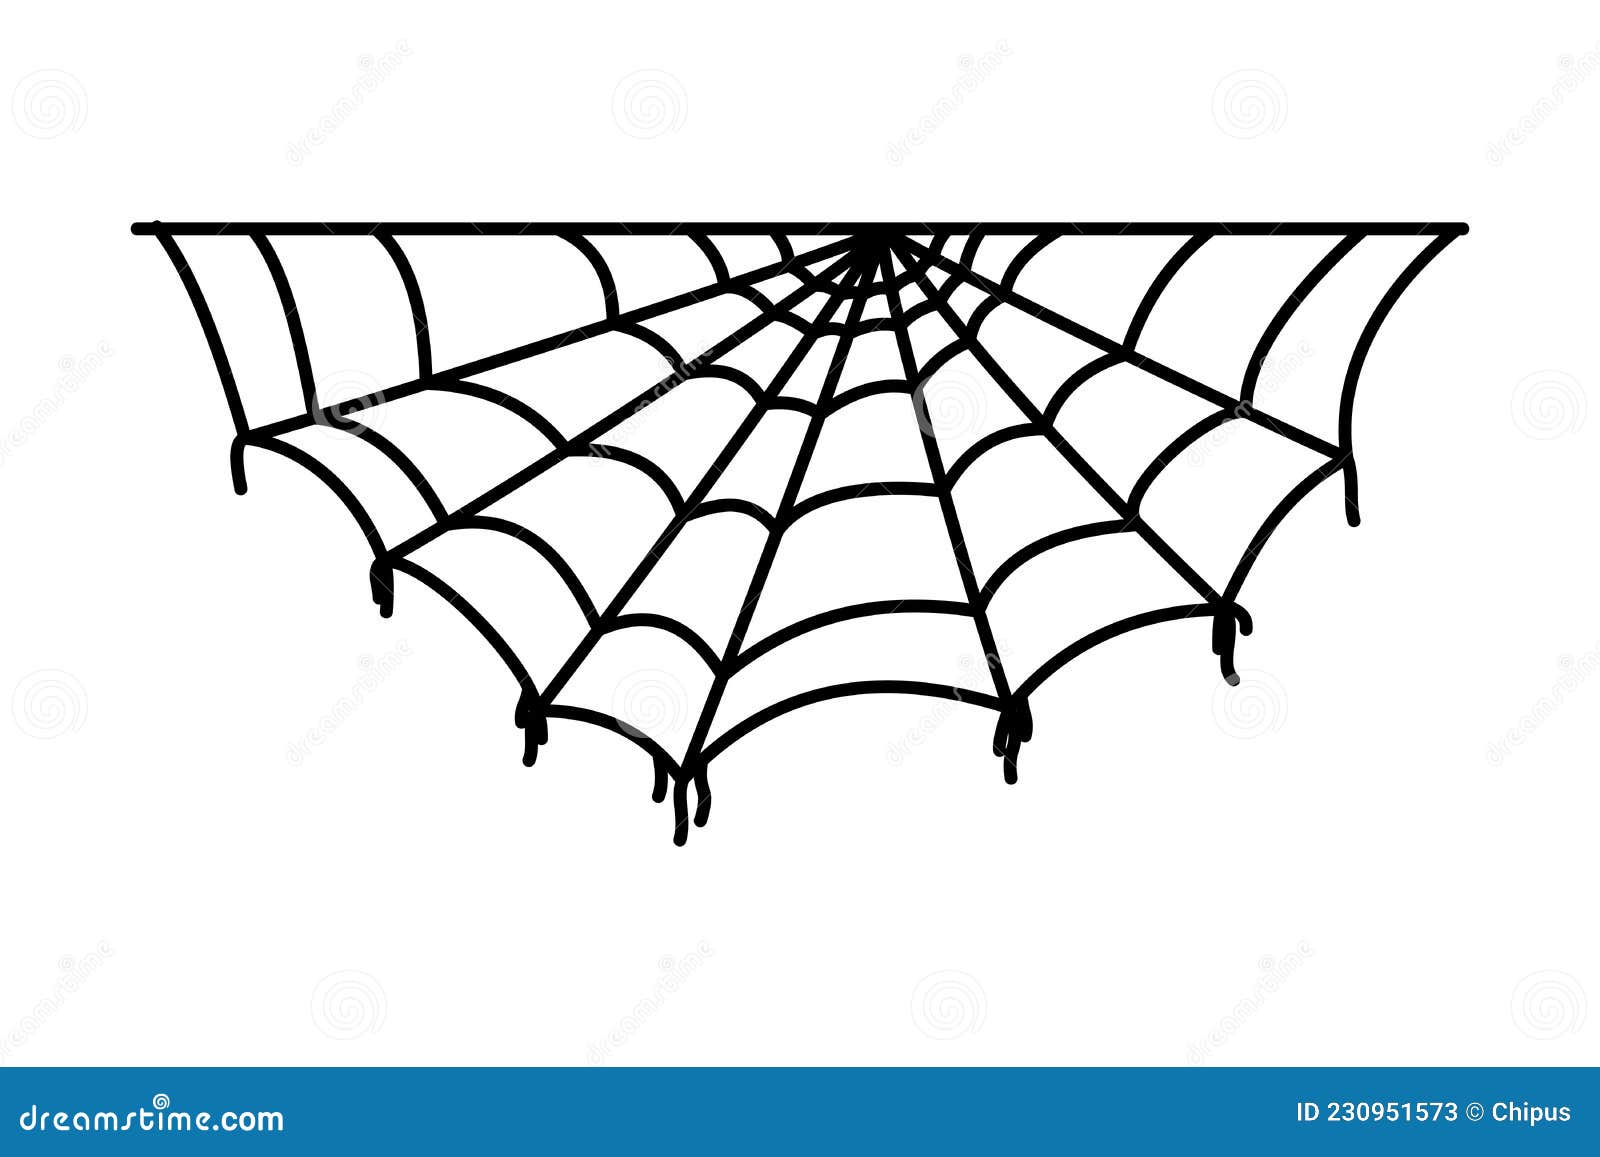 Spider Web Vector Art, Icons, and Graphics for Free Download